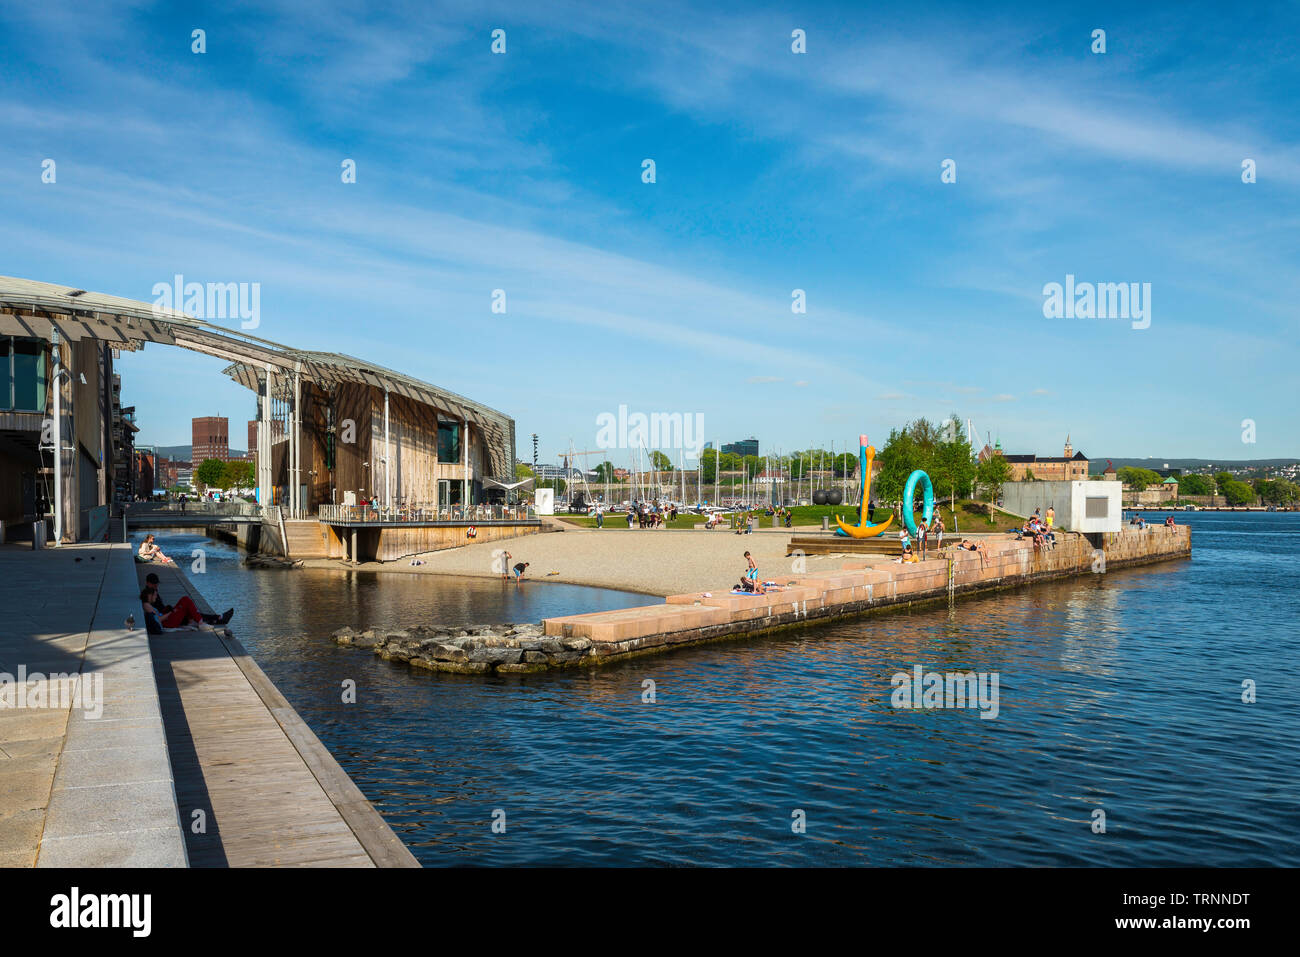 Oslo beach, view of people relaxing on Tjuvholmen City Beach in the harbour area of Oslo, Norway. Stock Photo